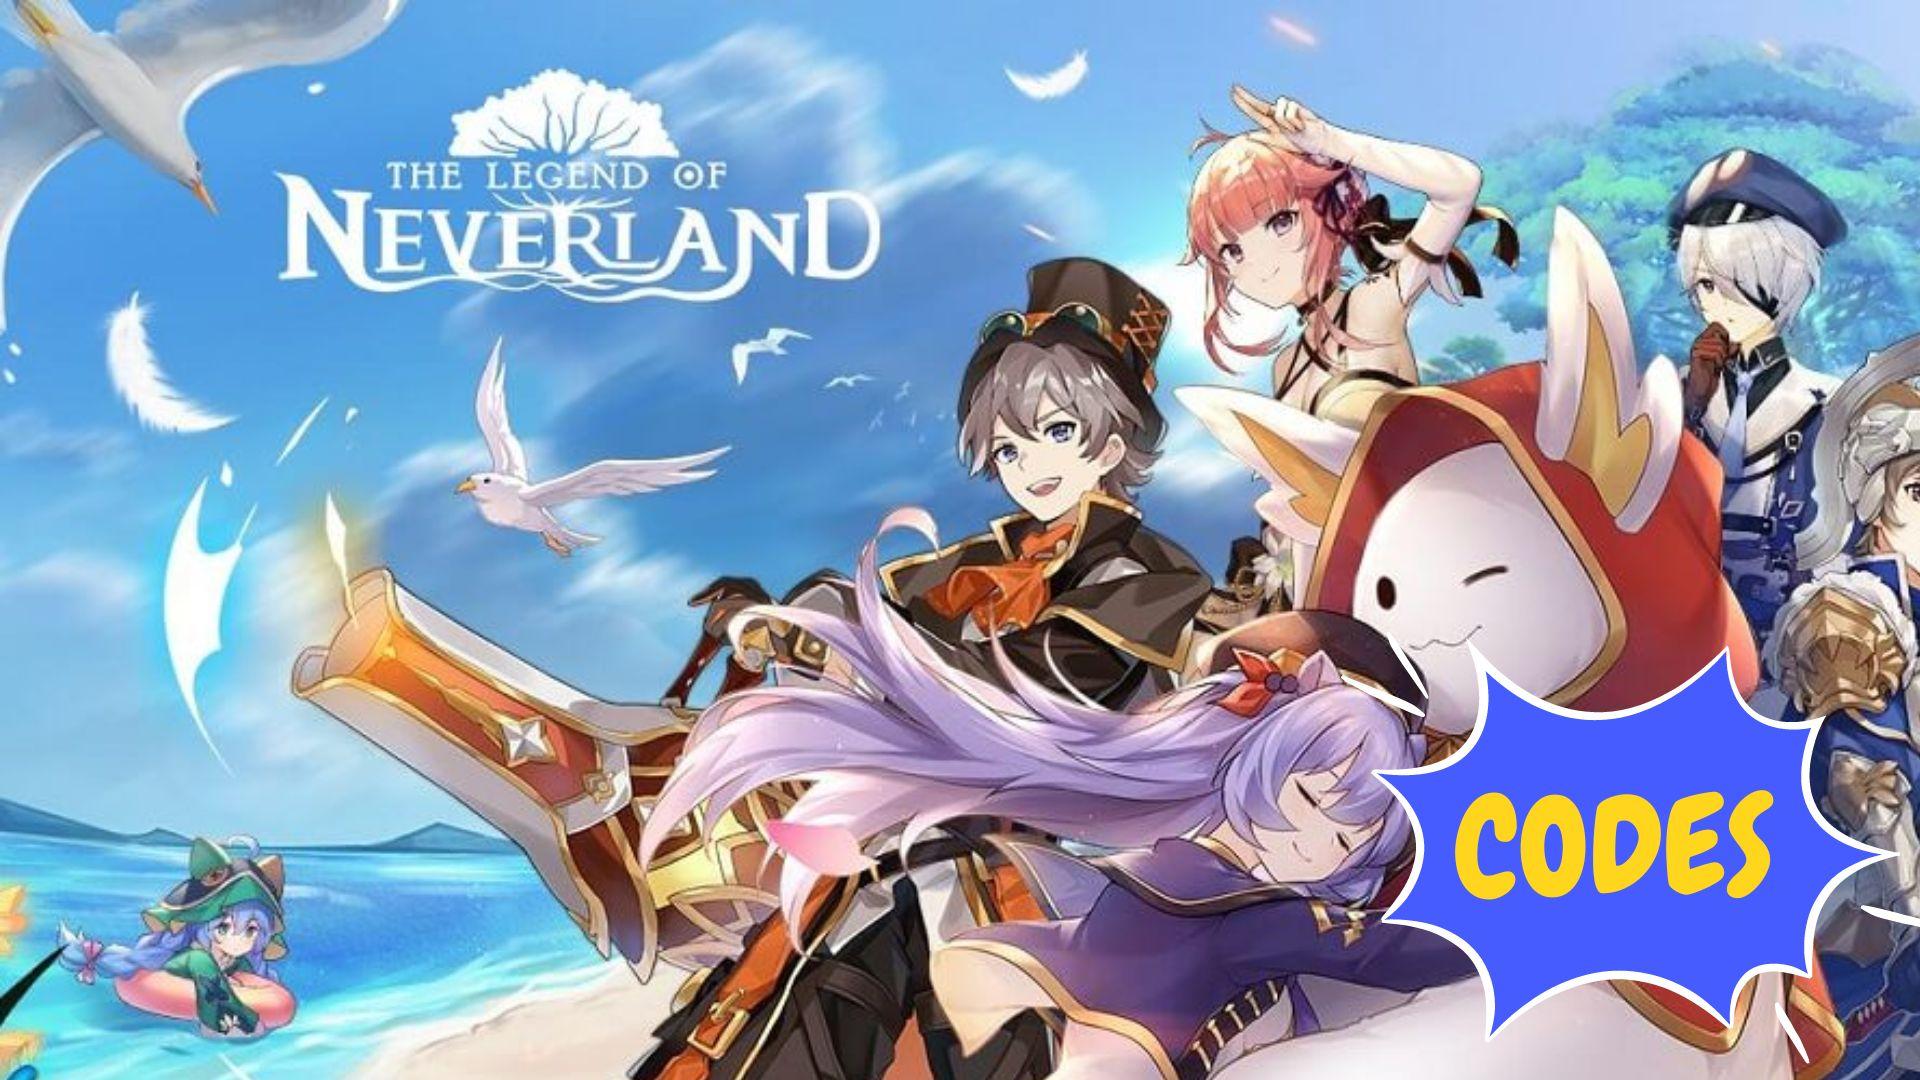 The Legend of Neverland - 👍Like our Facebook to win an 𝗲𝘅𝗰𝗹𝘂𝘀𝗶𝘃𝗲  𝗺𝗼𝘂𝗻𝘁 - Velociraptor! Once The Legend of Neverland is officially  released, Miru will share a redeem code 𝗼𝗻𝗹𝘆 with all